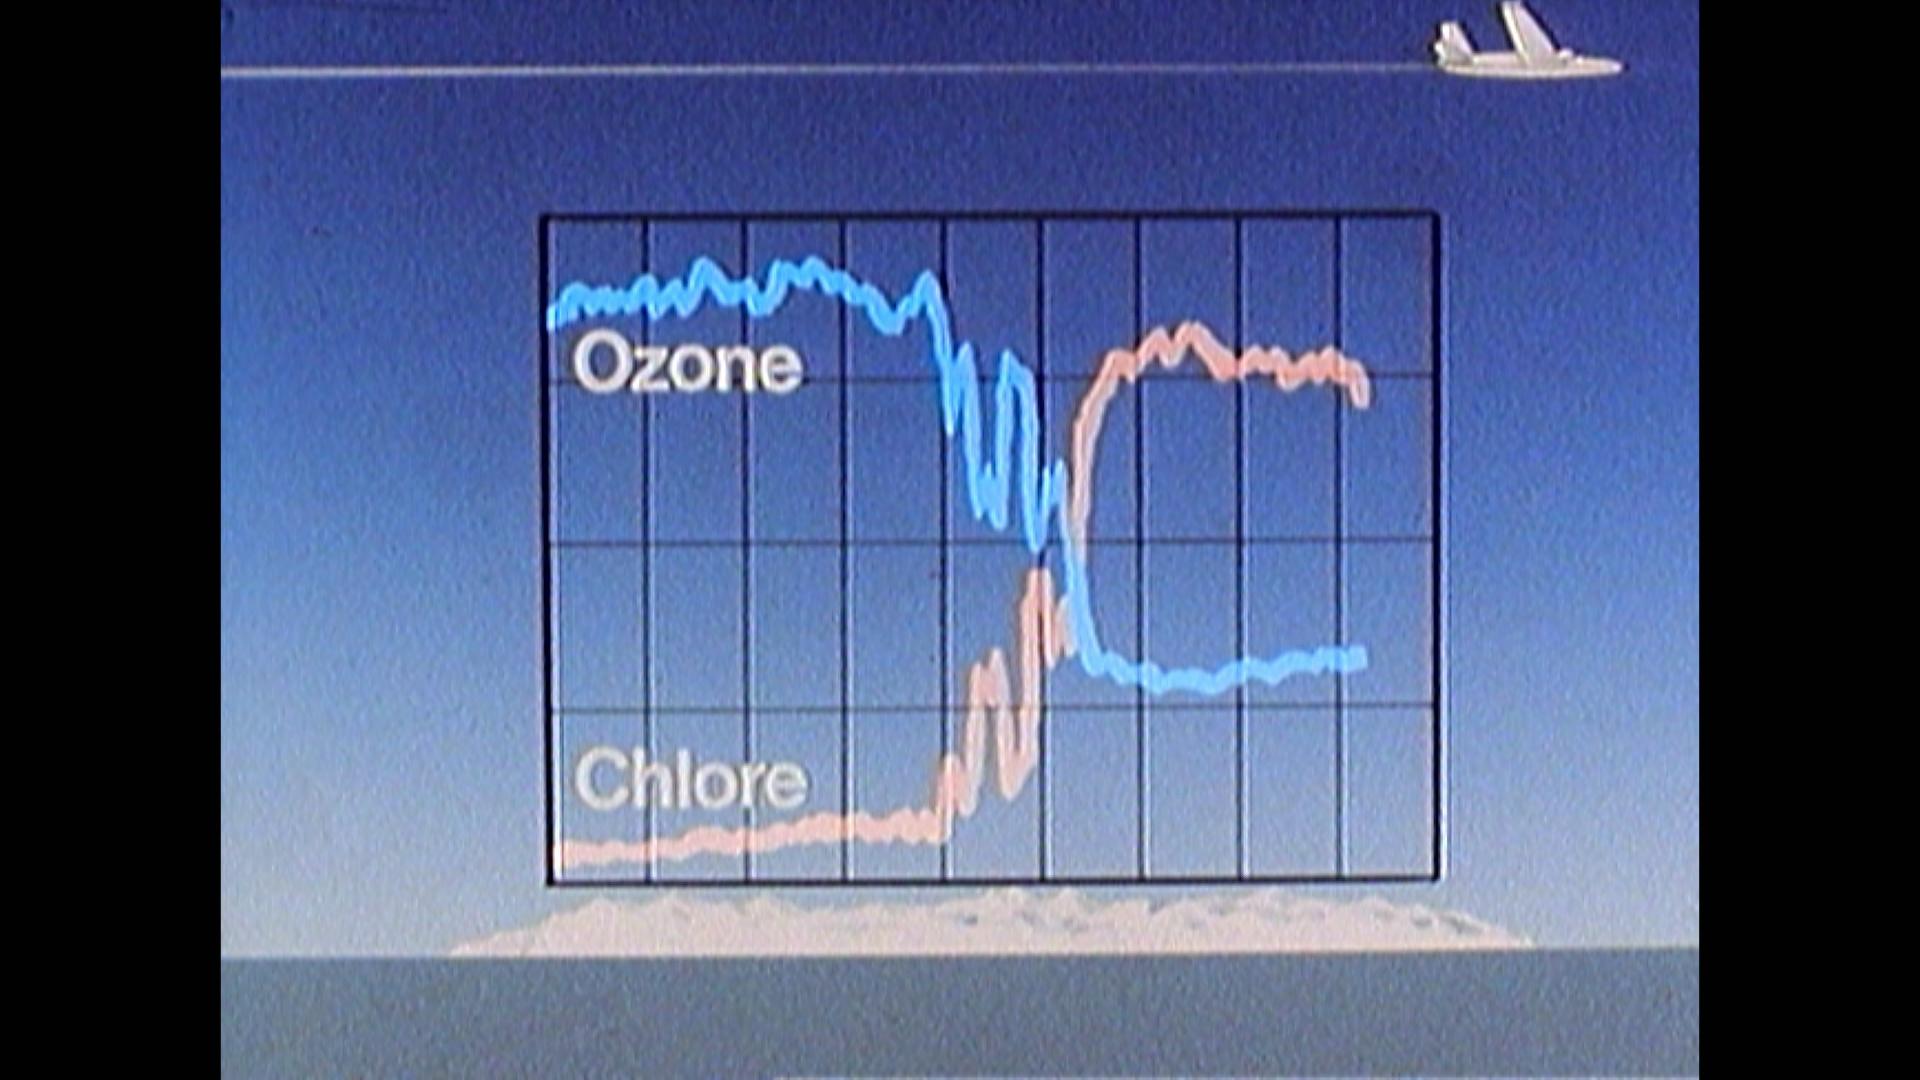 Chart of the correlation between the increase of chlorine and depletion of ozone in Antartica, 1987.